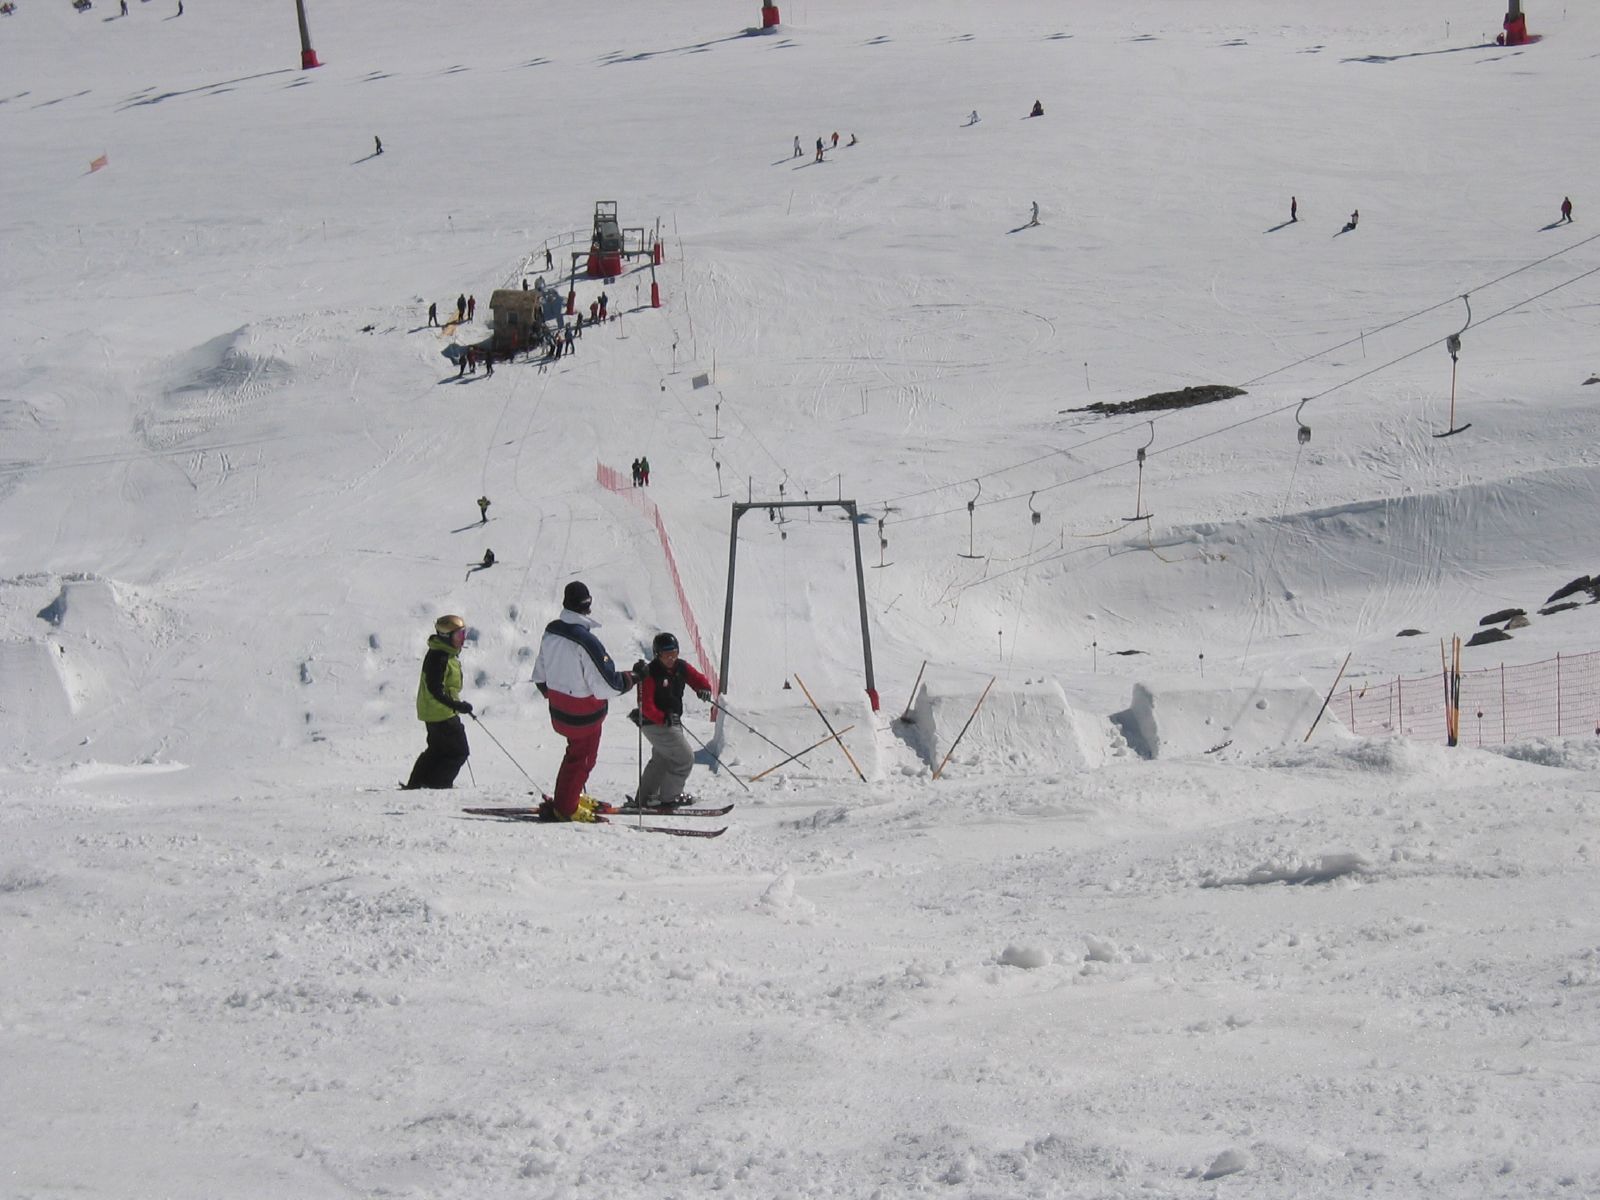 several skiers standing on snow covered ground in ski area